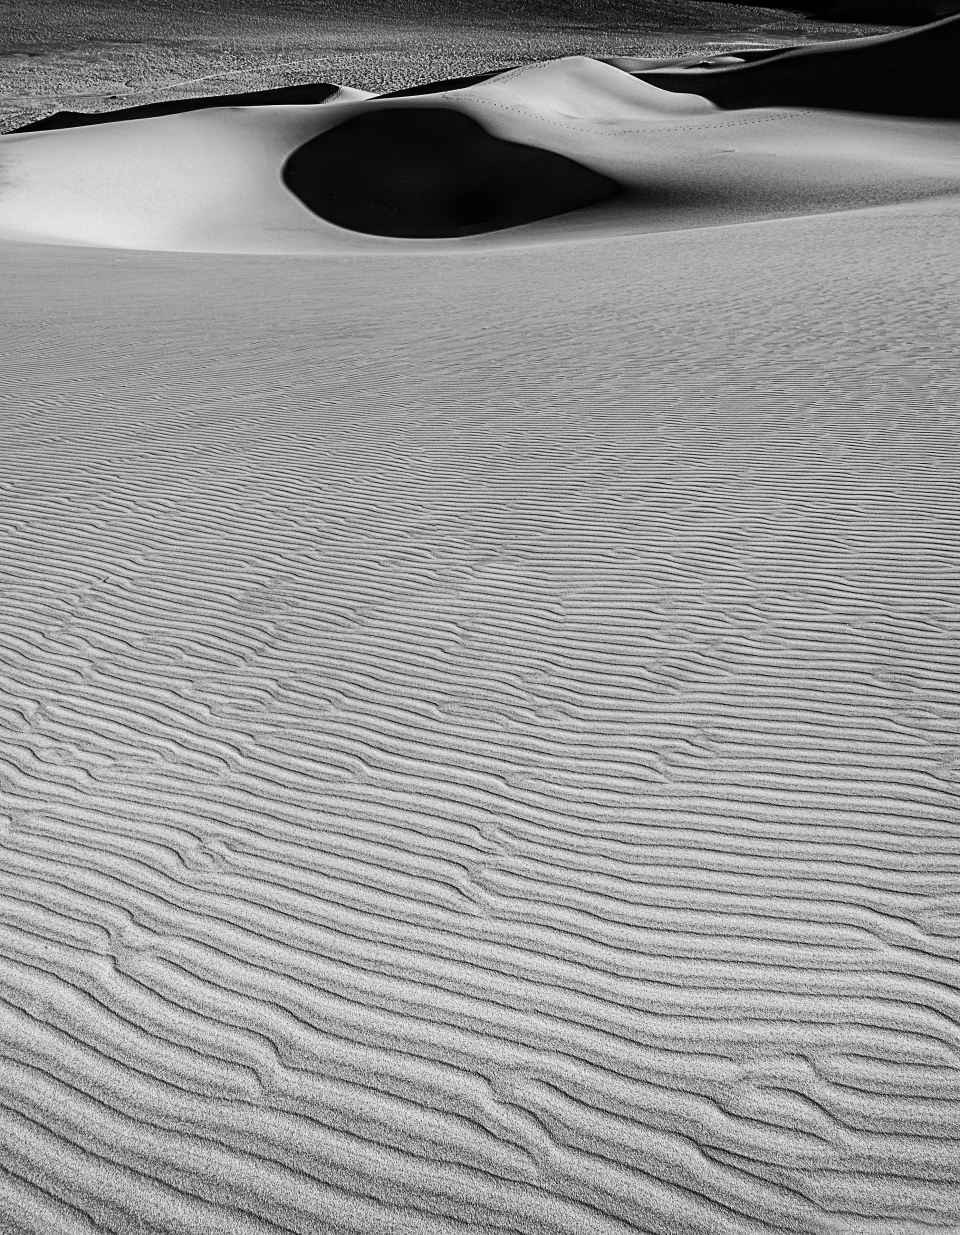 The Grace of Dunes